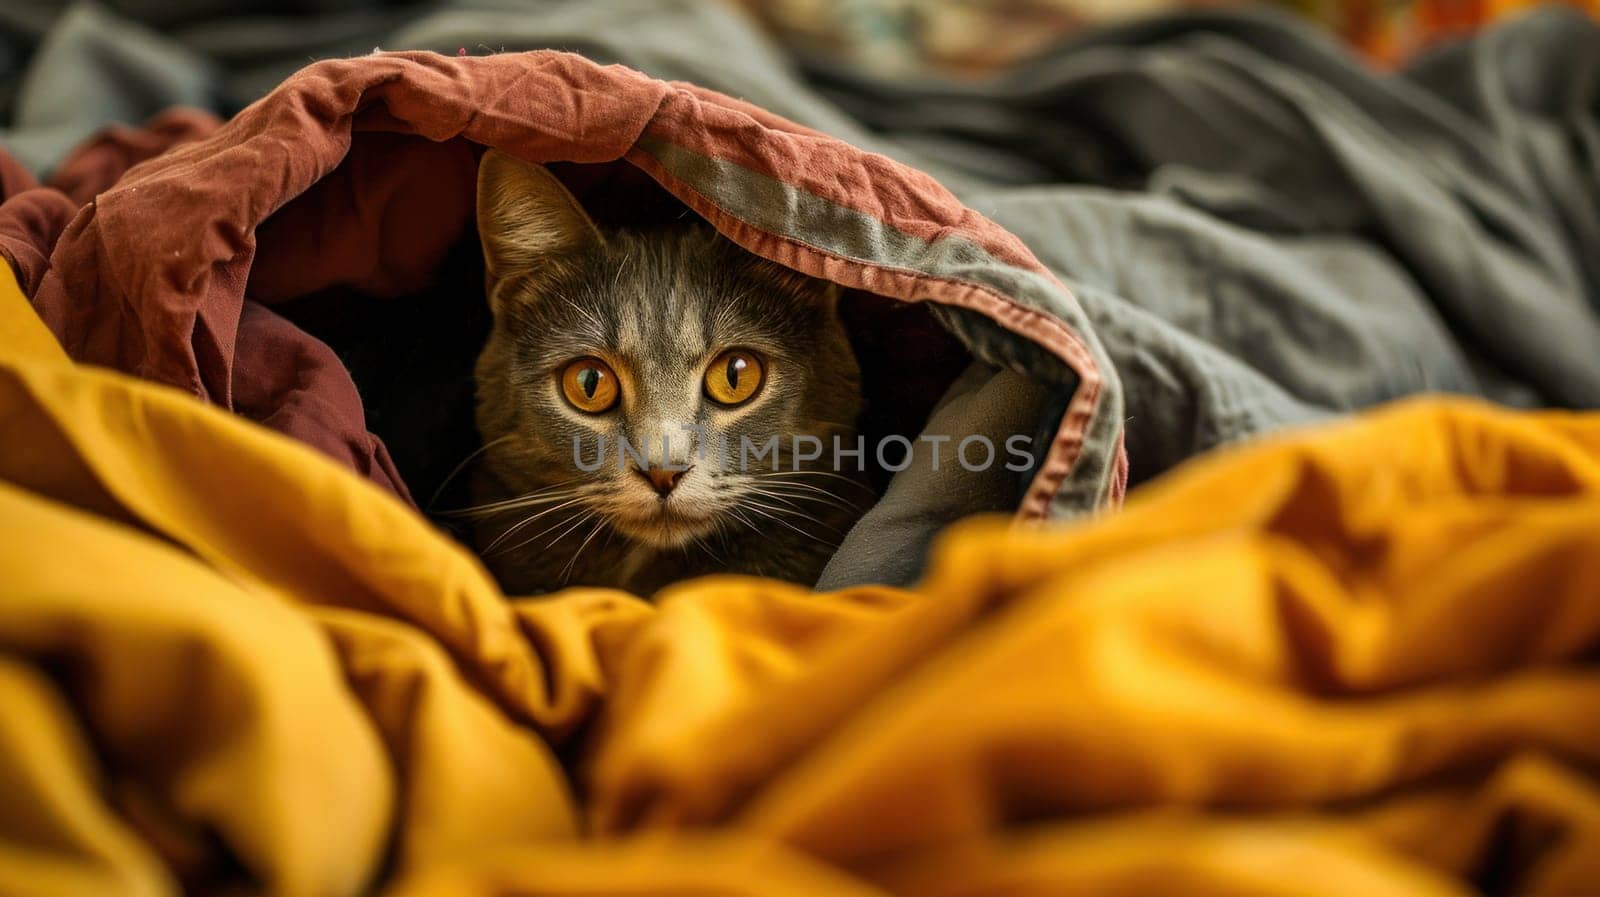 A cat peeking out from under a blanket on top of bedding, AI by starush